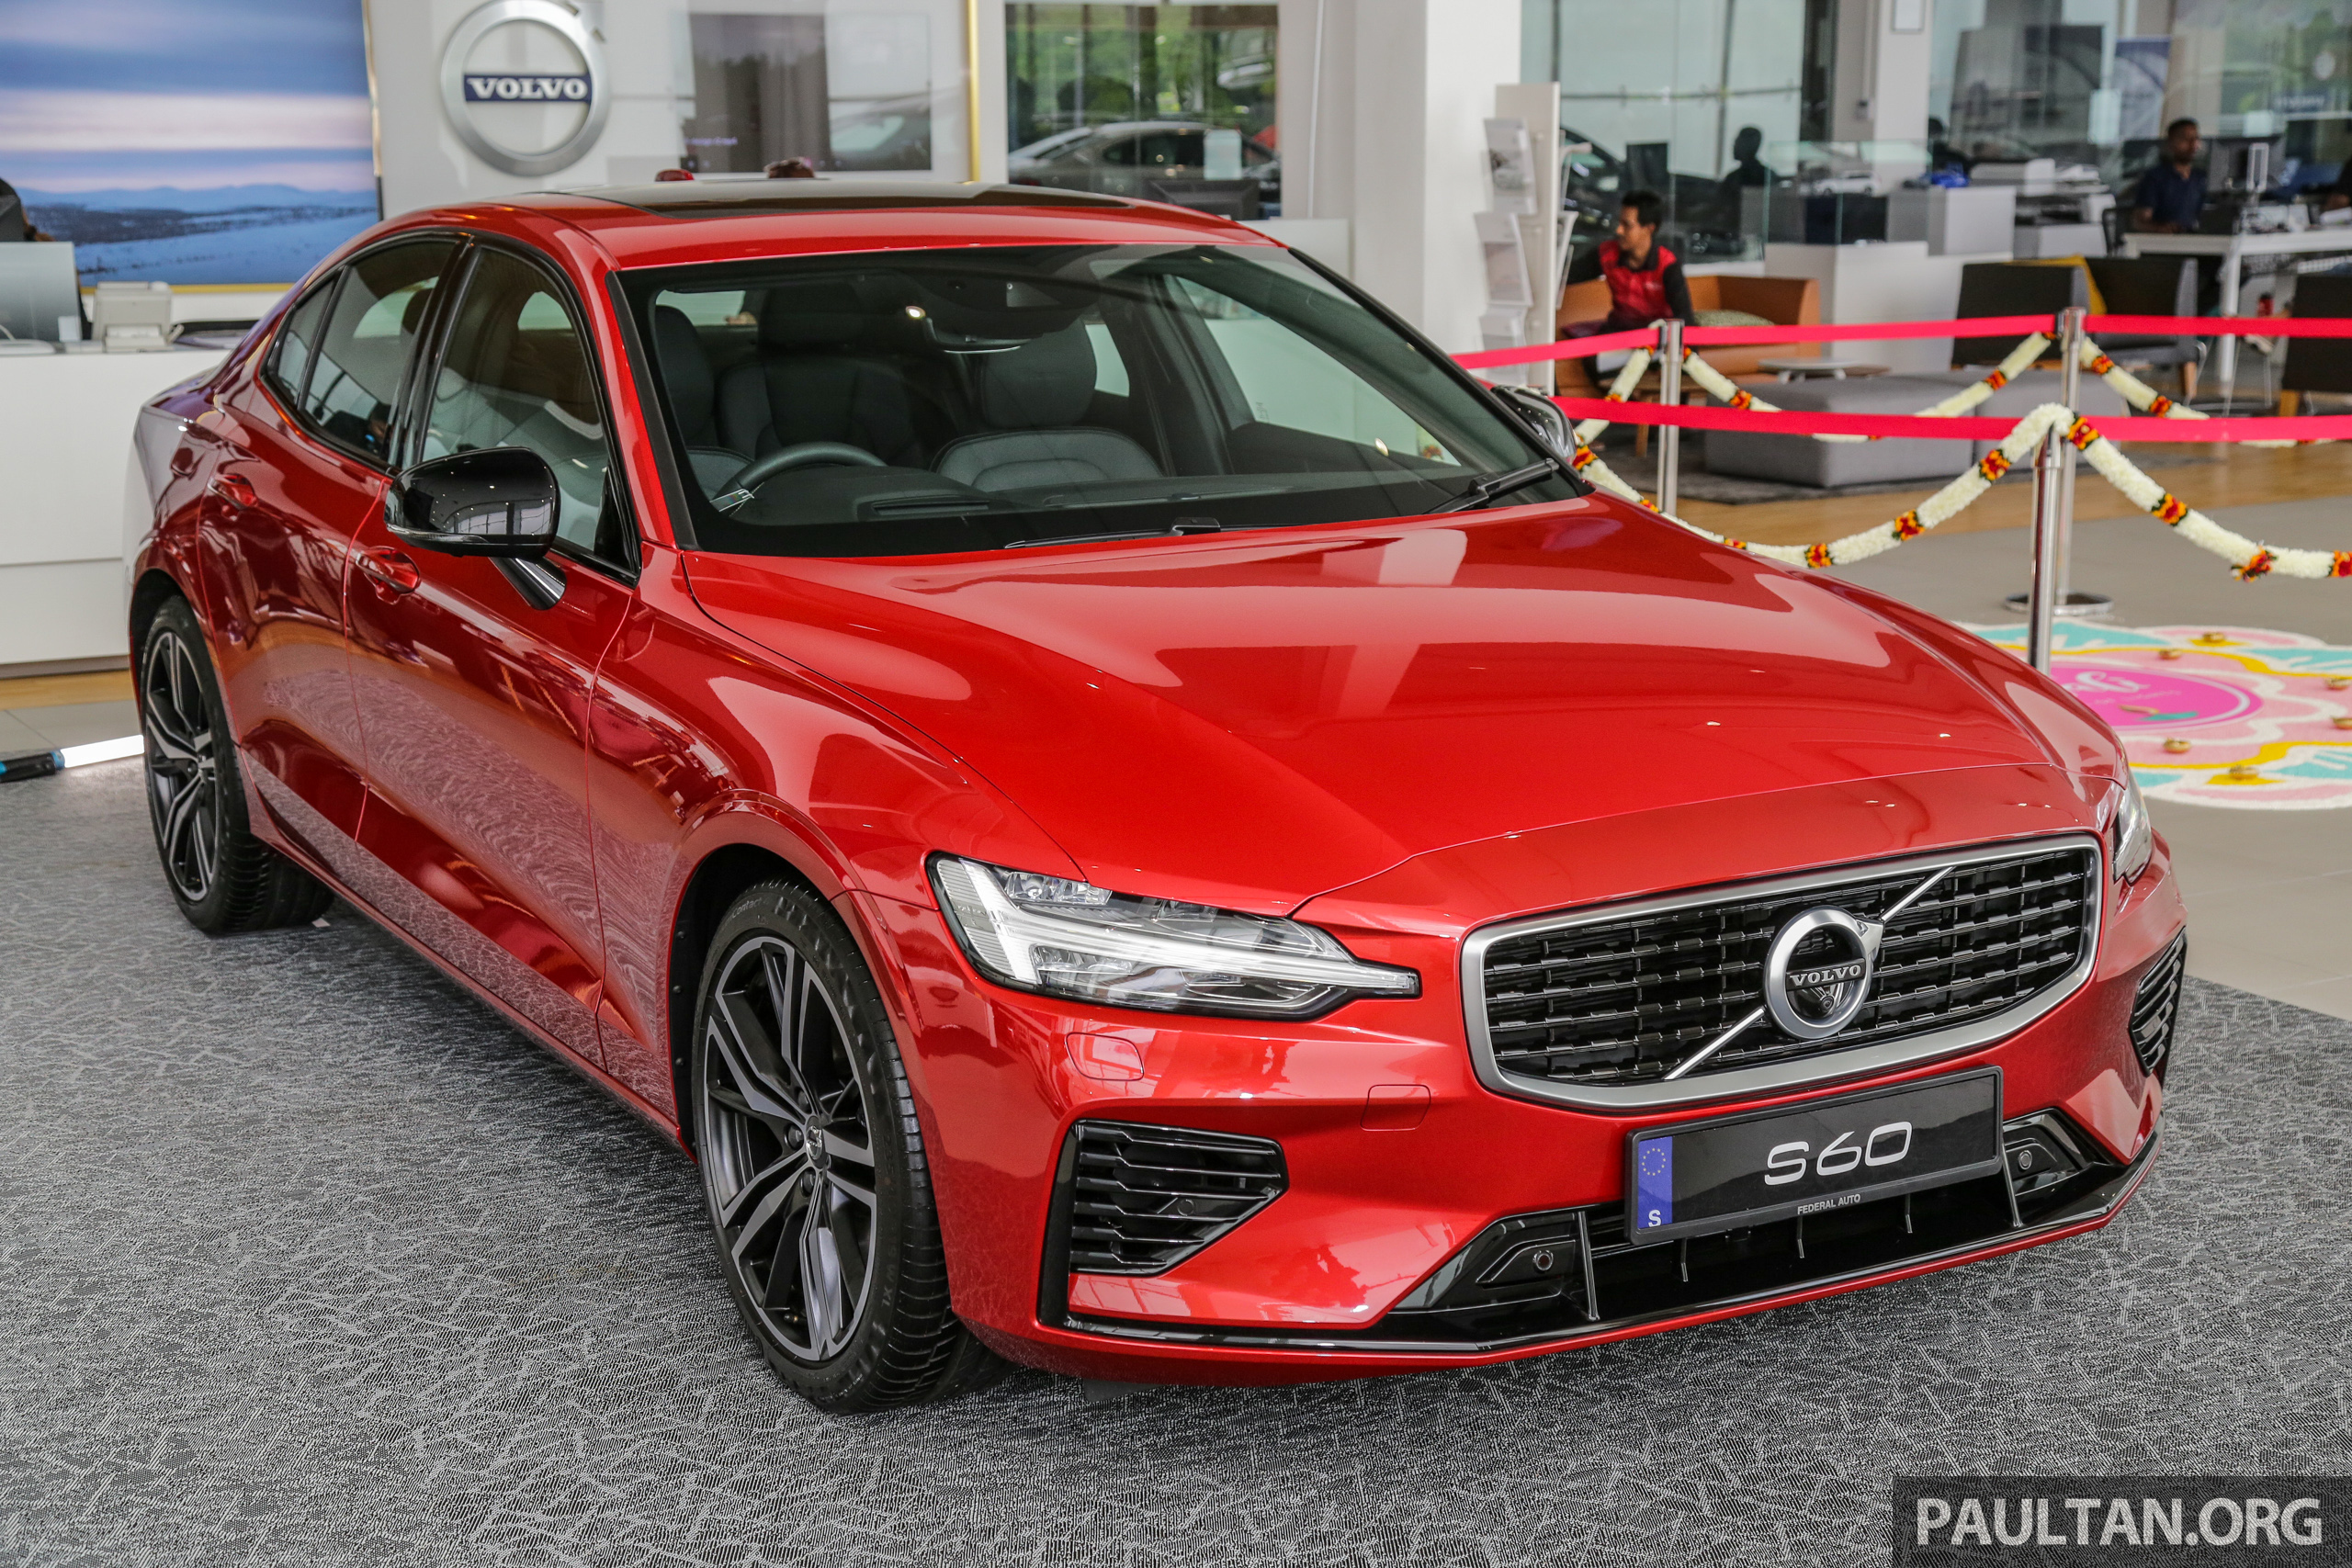 2019 Volvo S60 T8 R-Design launched in Malaysia – 2.0L PHEV, 407 hp